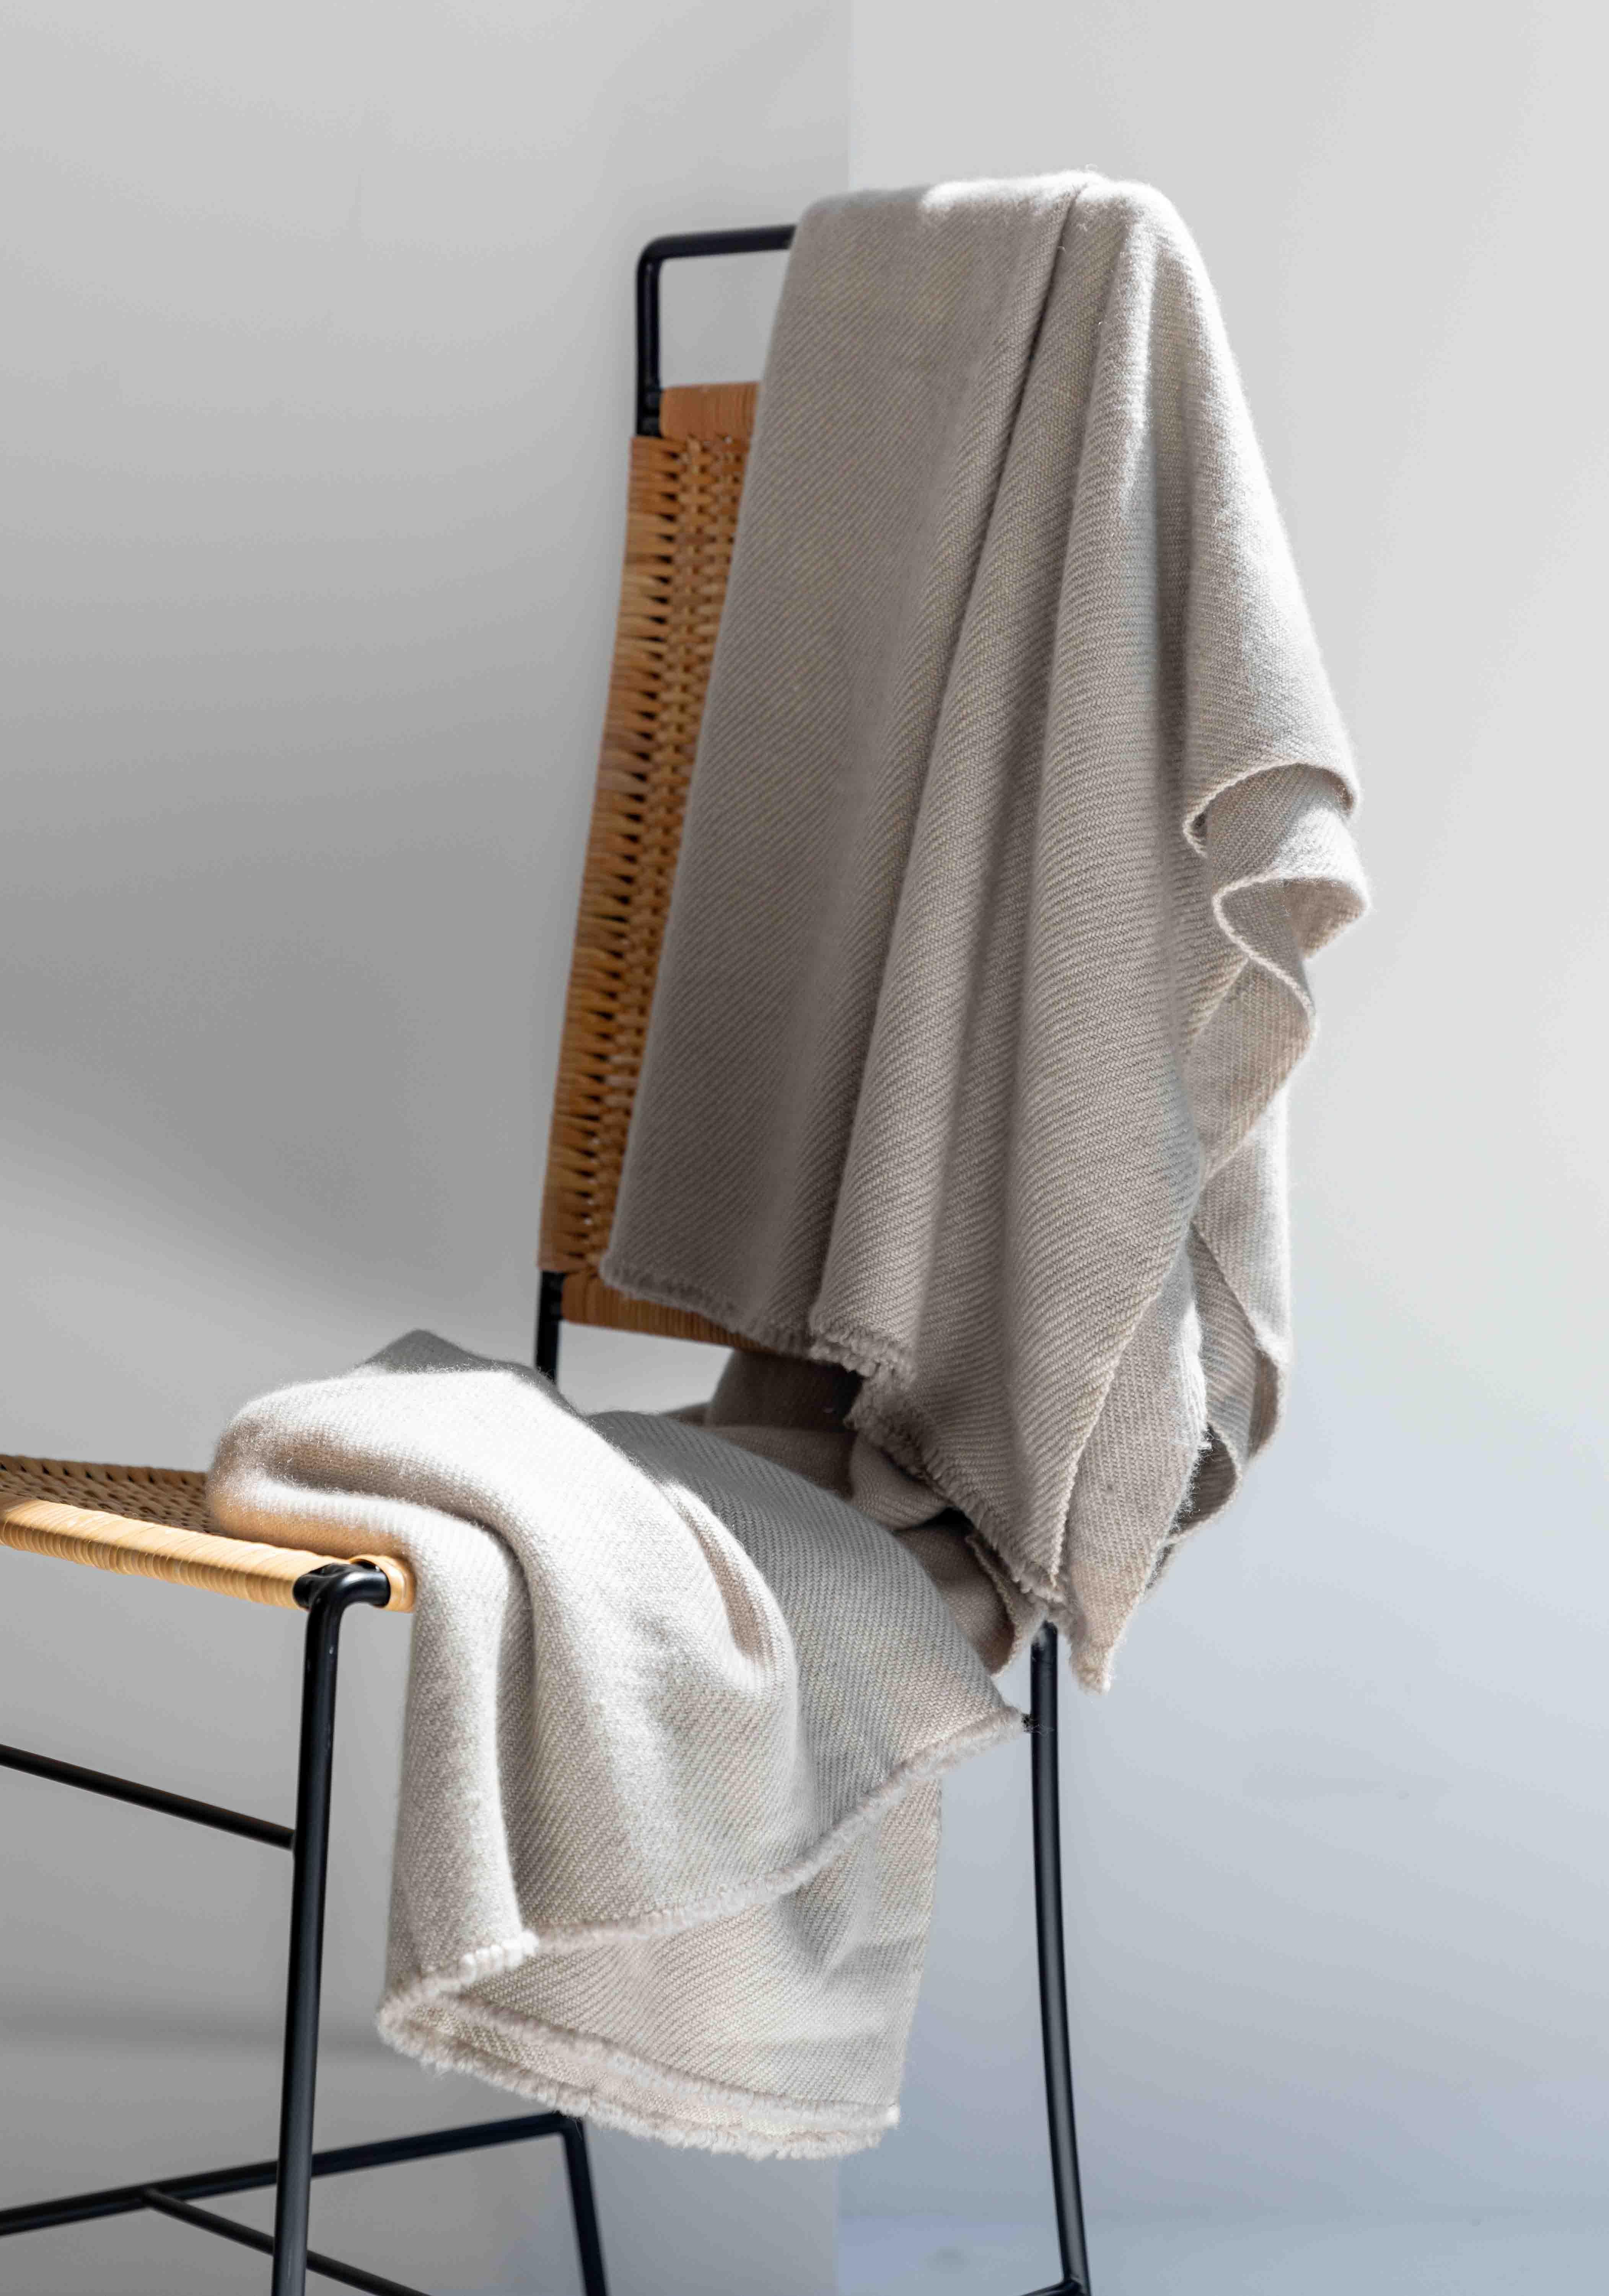 The Vica Cashmere Throw is handmade by artisans in Nepal using the finest cashmere and offered in four versatile colors meticulously created with 100% organic vegetable dye: green, cream, shahtoosh, and light grey. Available exclusively through